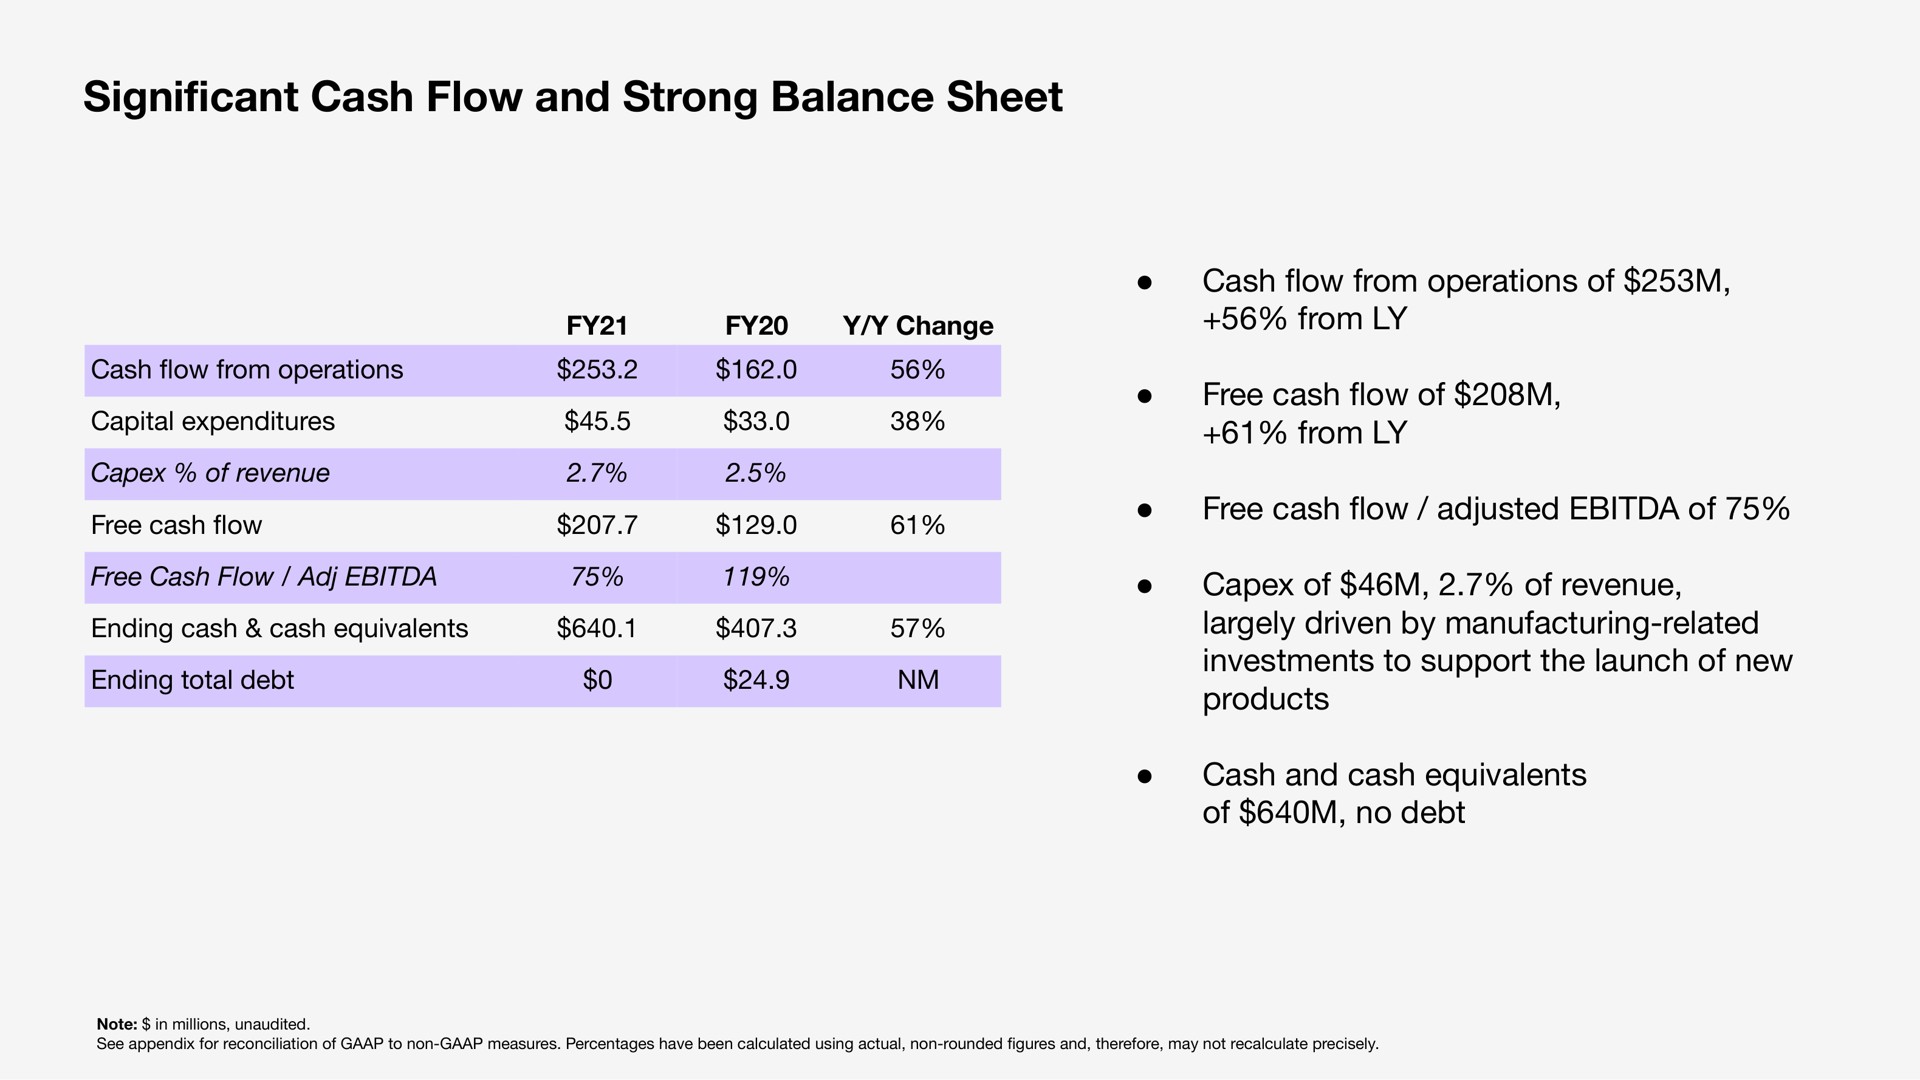 cant cash flow and strong balance sheet significant of no debt | Sonos